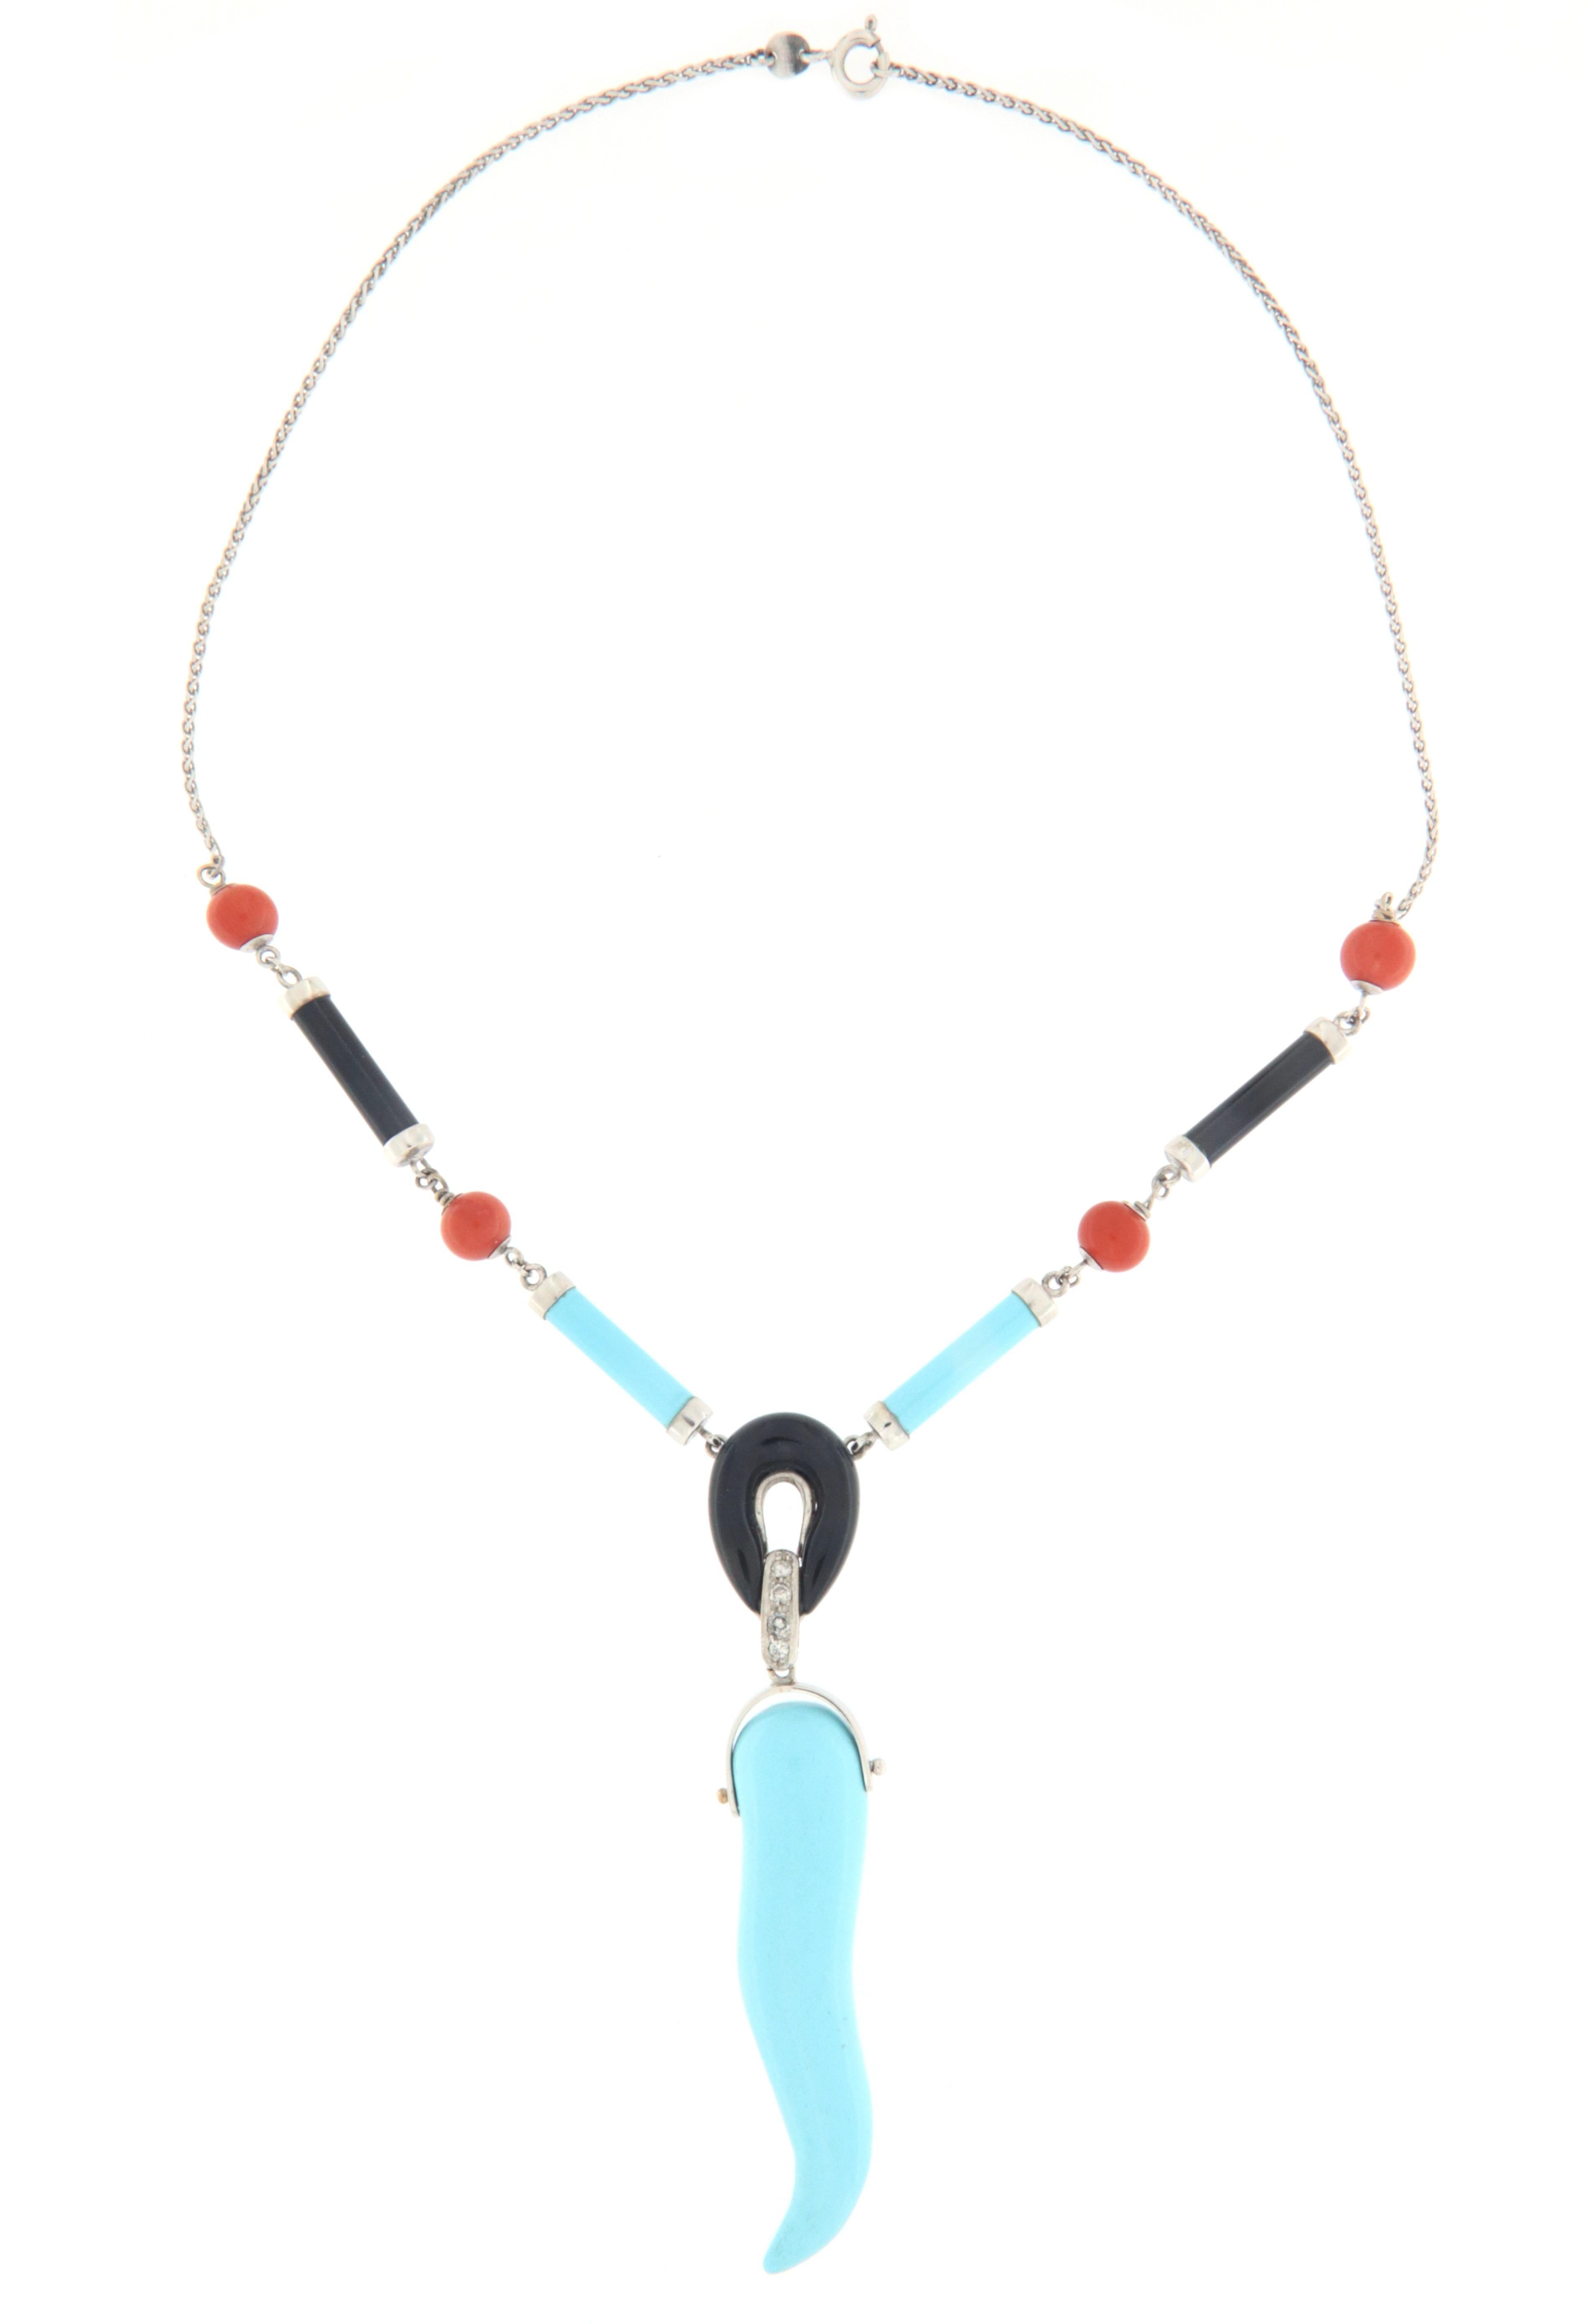 Amazing 18 karat white gold pendant necklace. Handmade by our artisans assembled with diamonds,barrels onyx and turquoise,coral bead and turquoise horn

Pendant necklace total weight 21.40 grams
Diamonds weight 0.17 karat
Coral bead size 6.65